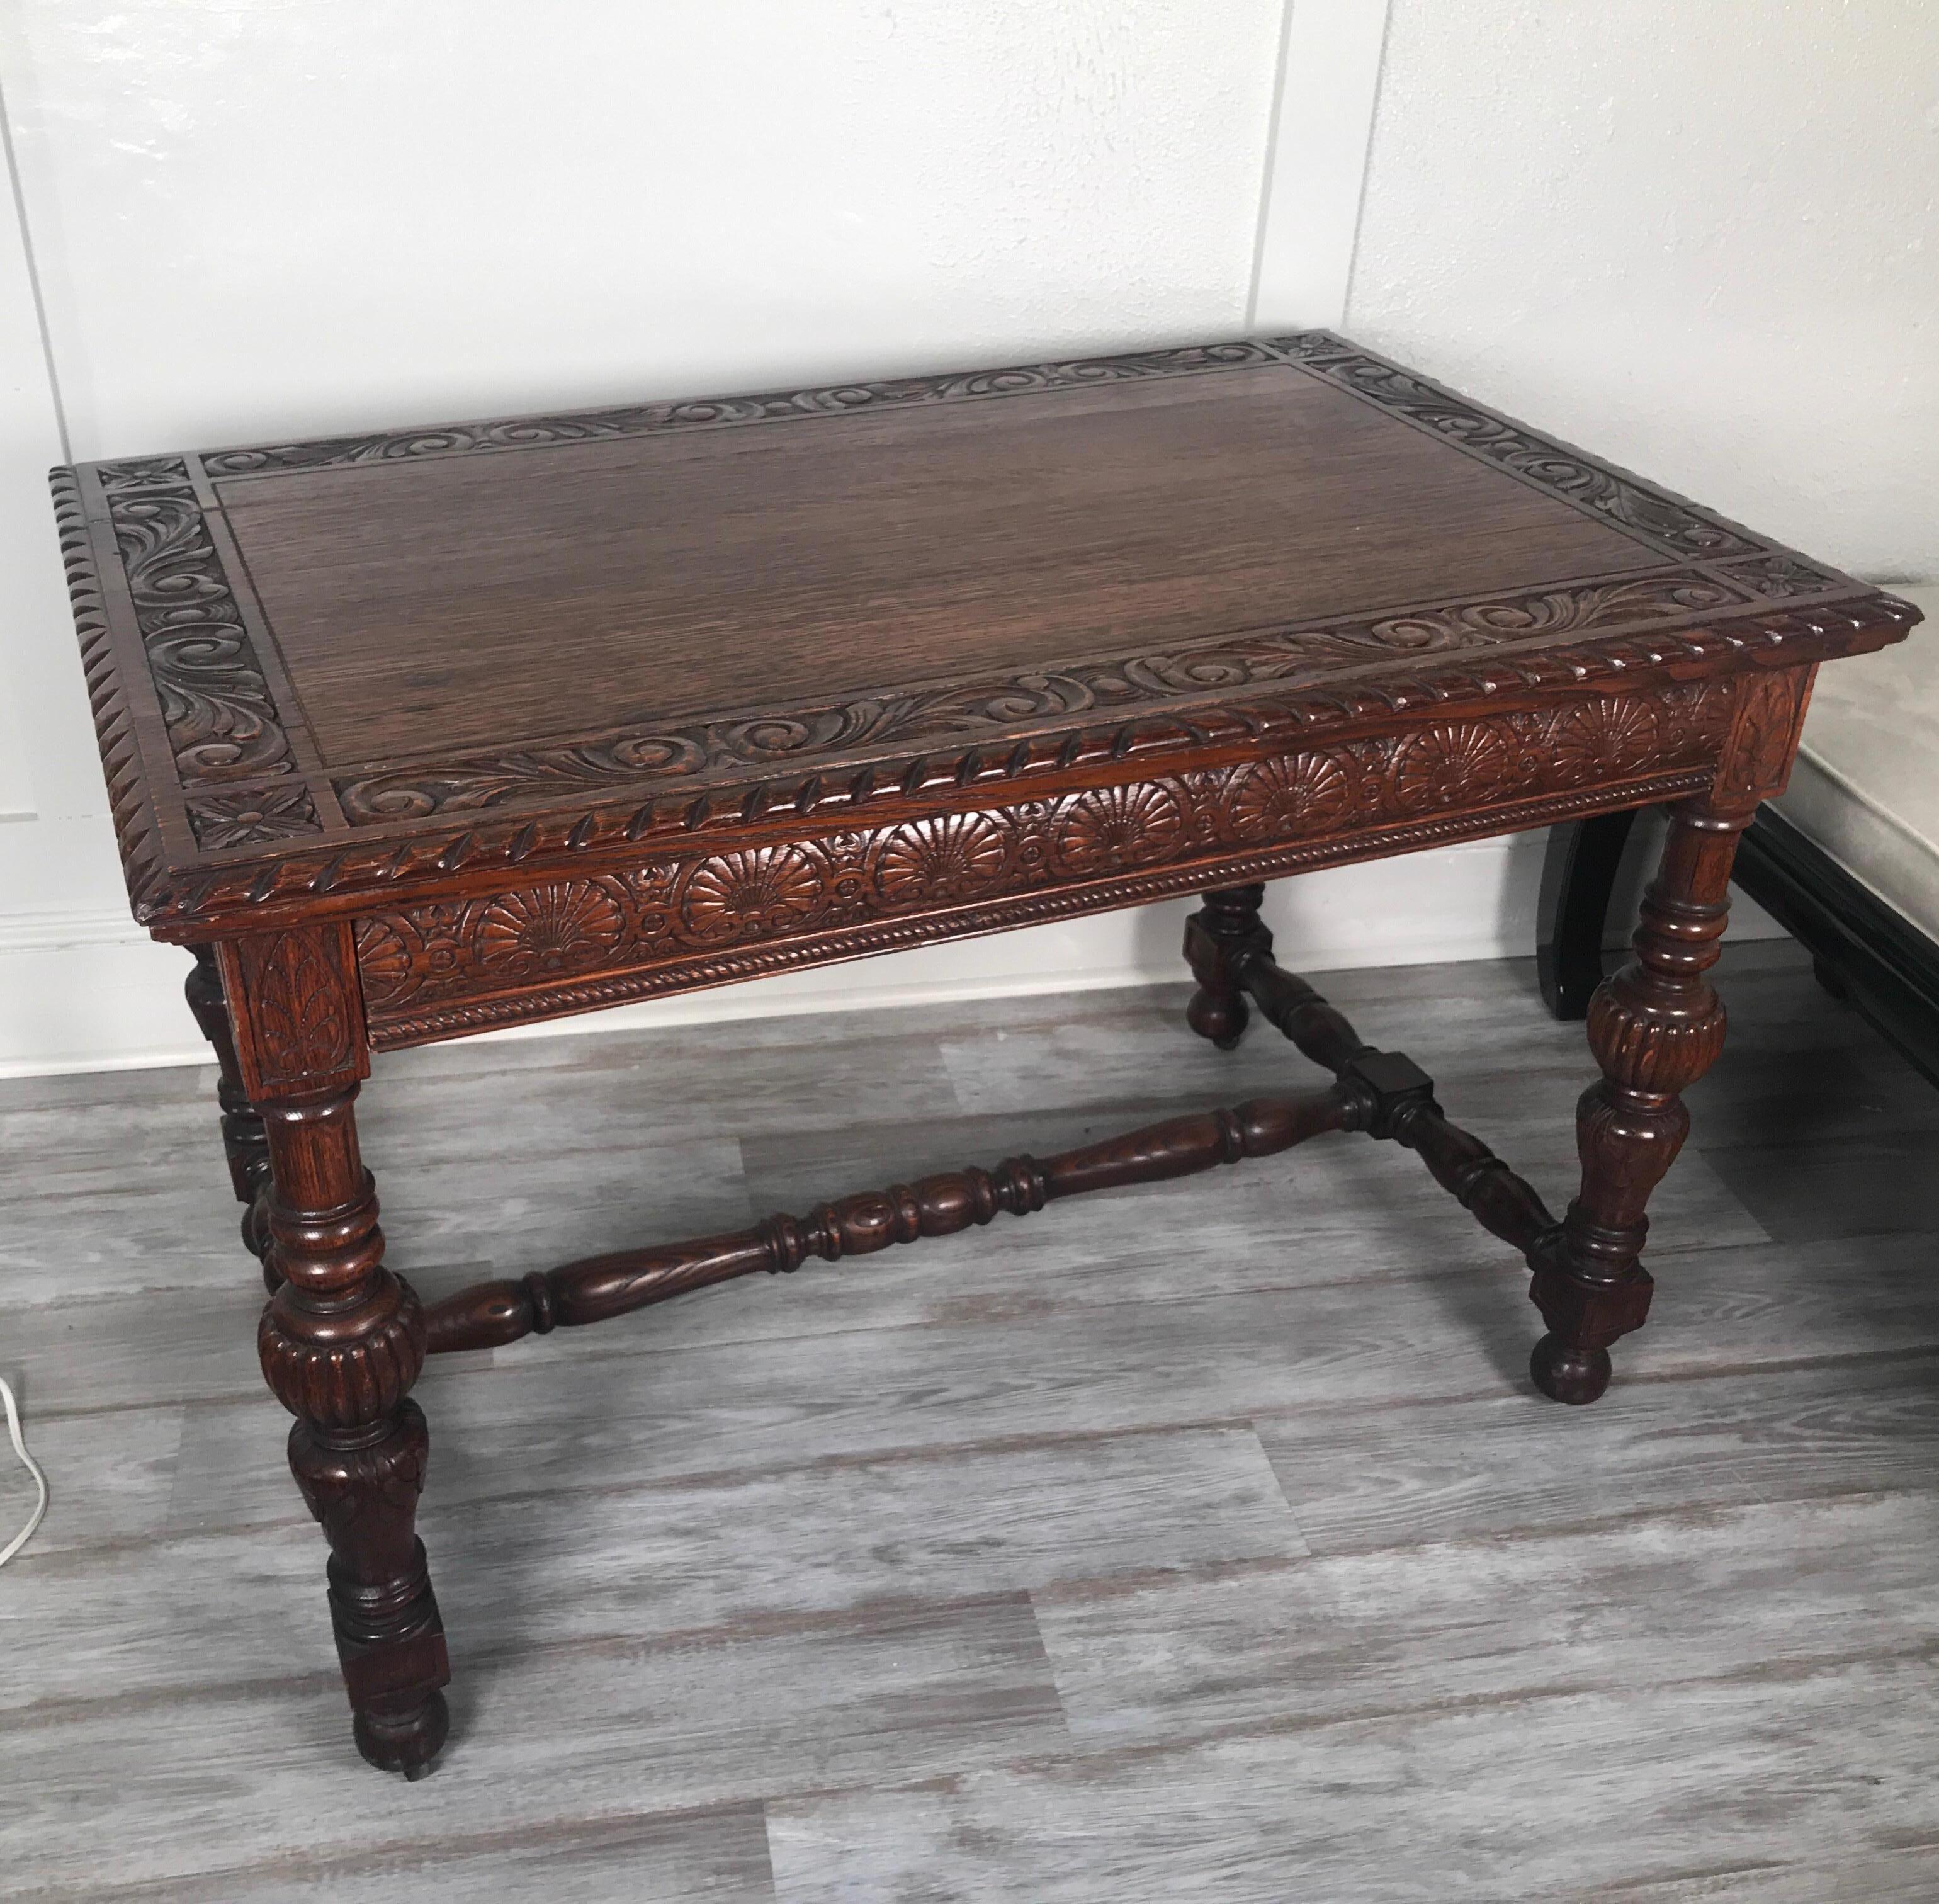 The carved top with single drawer in the apron concealed in the front. The table desk with gadrooned edge sits on four turned legs with H stretcher base. Nice smaller size with warm color.